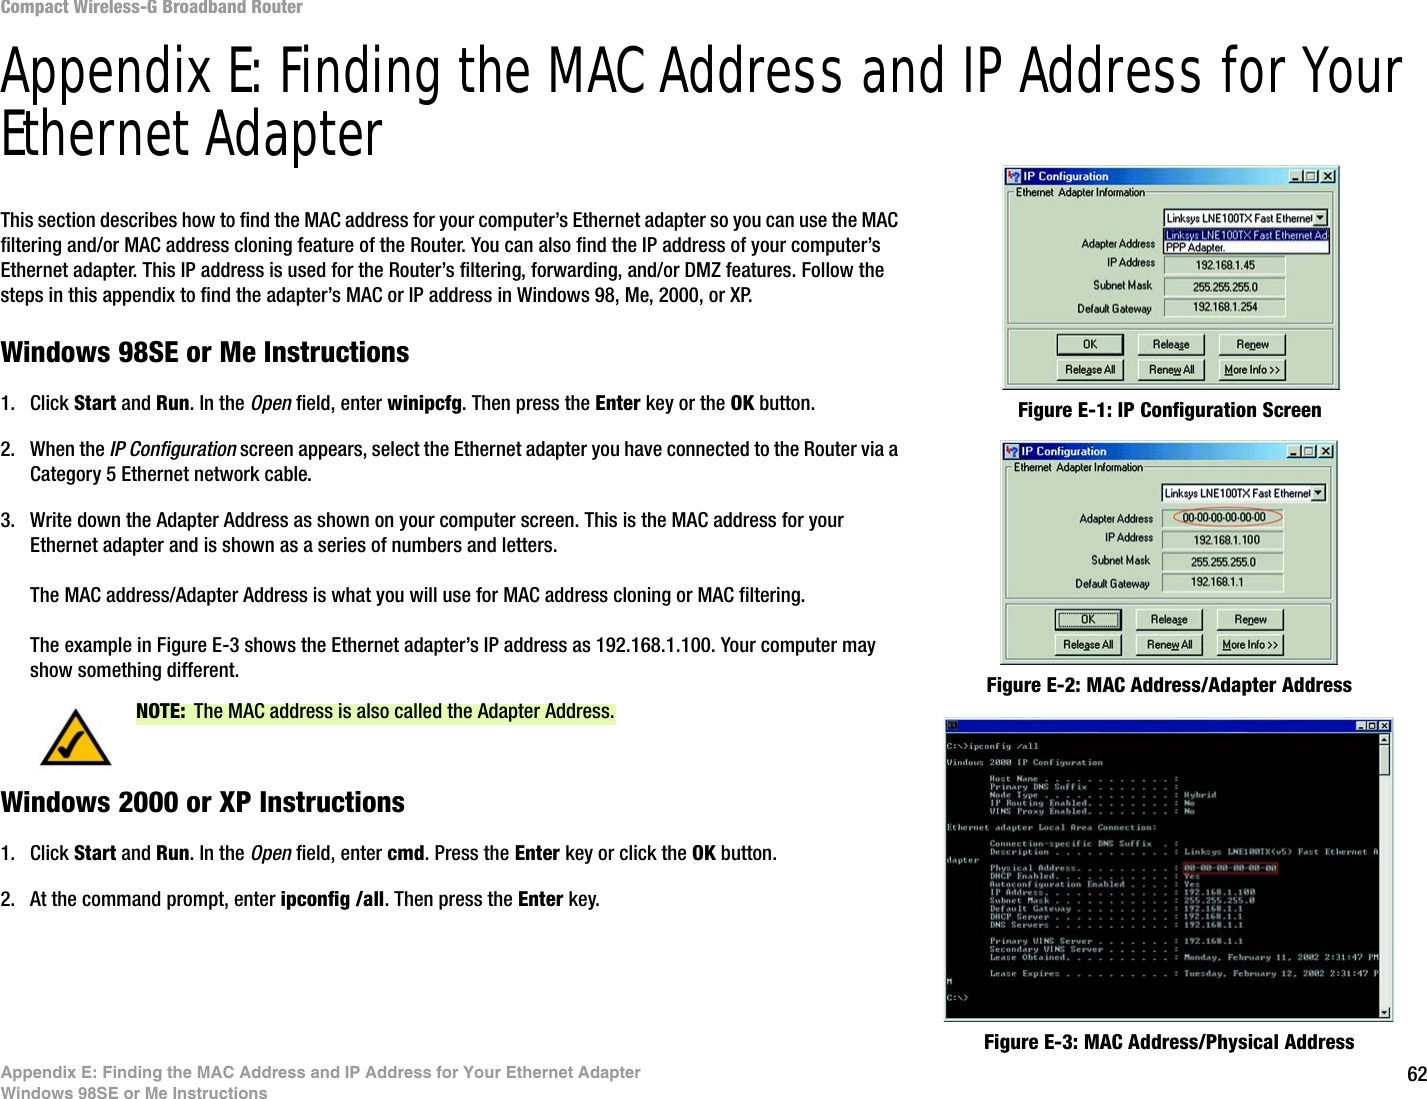 62Appendix E: Finding the MAC Address and IP Address for Your Ethernet AdapterWindows 98SE or Me InstructionsCompact Wireless-G Broadband RouterAppendix E: Finding the MAC Address and IP Address for Your Ethernet AdapterThis section describes how to find the MAC address for your computer’s Ethernet adapter so you can use the MAC filtering and/or MAC address cloning feature of the Router. You can also find the IP address of your computer’s Ethernet adapter. This IP address is used for the Router’s filtering, forwarding, and/or DMZ features. Follow the steps in this appendix to find the adapter’s MAC or IP address in Windows 98, Me, 2000, or XP.Windows 98SE or Me Instructions1. Click Start and Run. In the Open field, enter winipcfg. Then press the Enter key or the OK button. 2. When the IP Configuration screen appears, select the Ethernet adapter you have connected to the Router via a Category 5 Ethernet network cable.3. Write down the Adapter Address as shown on your computer screen. This is the MAC address for your Ethernet adapter and is shown as a series of numbers and letters.The MAC address/Adapter Address is what you will use for MAC address cloning or MAC filtering.The example in Figure E-3 shows the Ethernet adapter’s IP address as 192.168.1.100. Your computer may show something different.Windows 2000 or XP Instructions1. Click Start and Run. In the Open field, enter cmd. Press the Enter key or click the OK button.2. At the command prompt, enter ipconfig /all. Then press the Enter key.Figure E-2: MAC Address/Adapter AddressFigure E-1: IP Configuration ScreenNOTE: The MAC address is also called the Adapter Address.Figure E-3: MAC Address/Physical Address